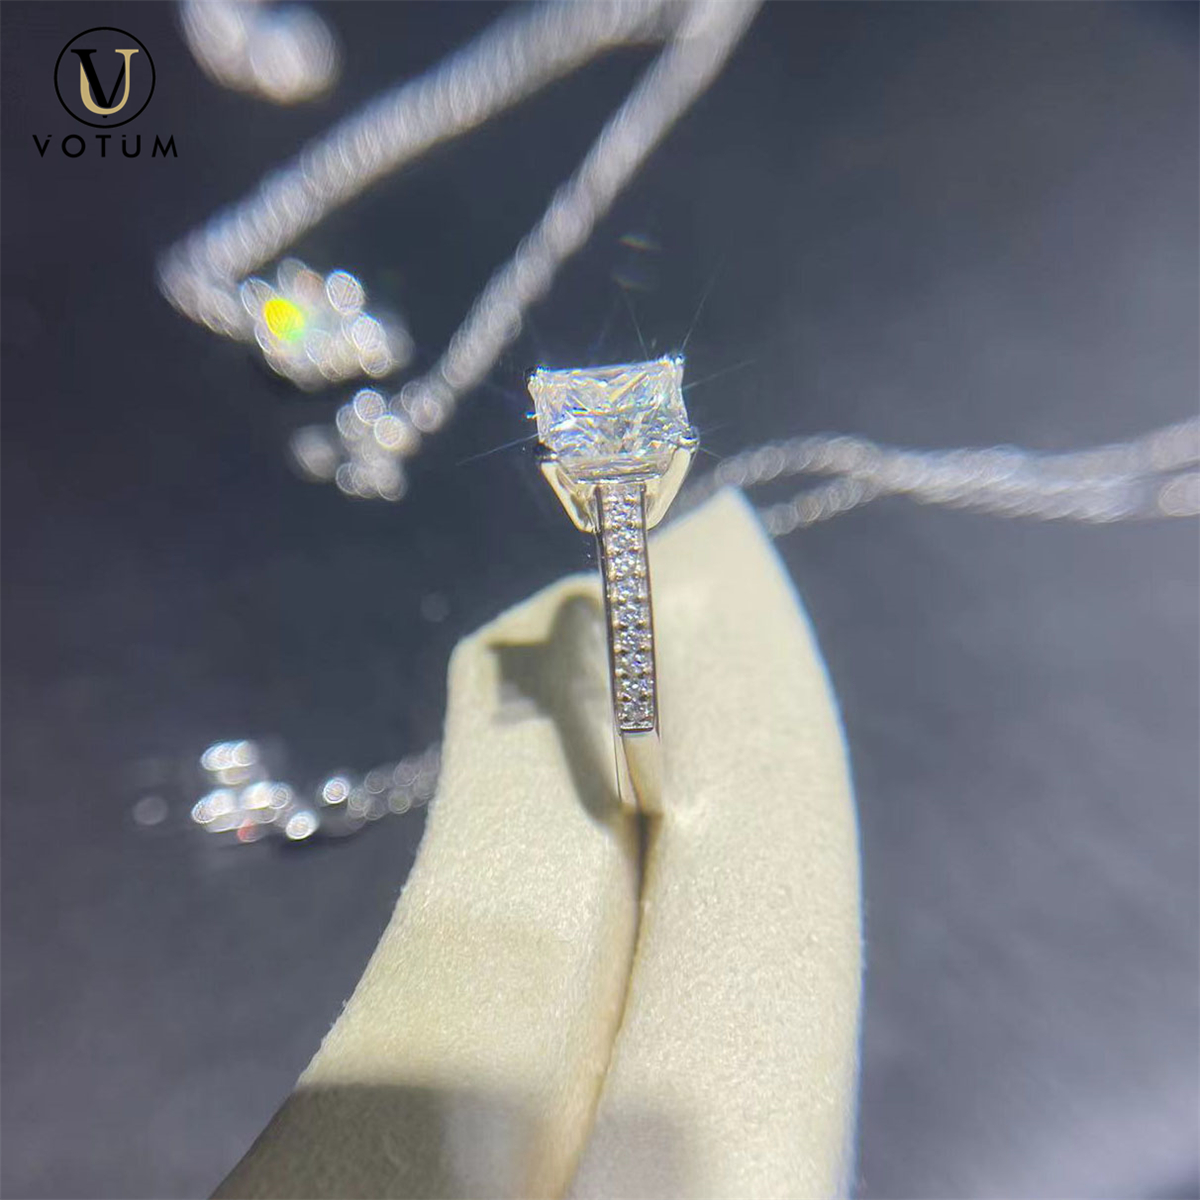 Votum Wholesale Princess Square Cut Gra Moissanite Sparking Engagement Ring with 925 Silver Fashion 18K Gold Plated Wedding Fine Jewelry Jewellery Accessories